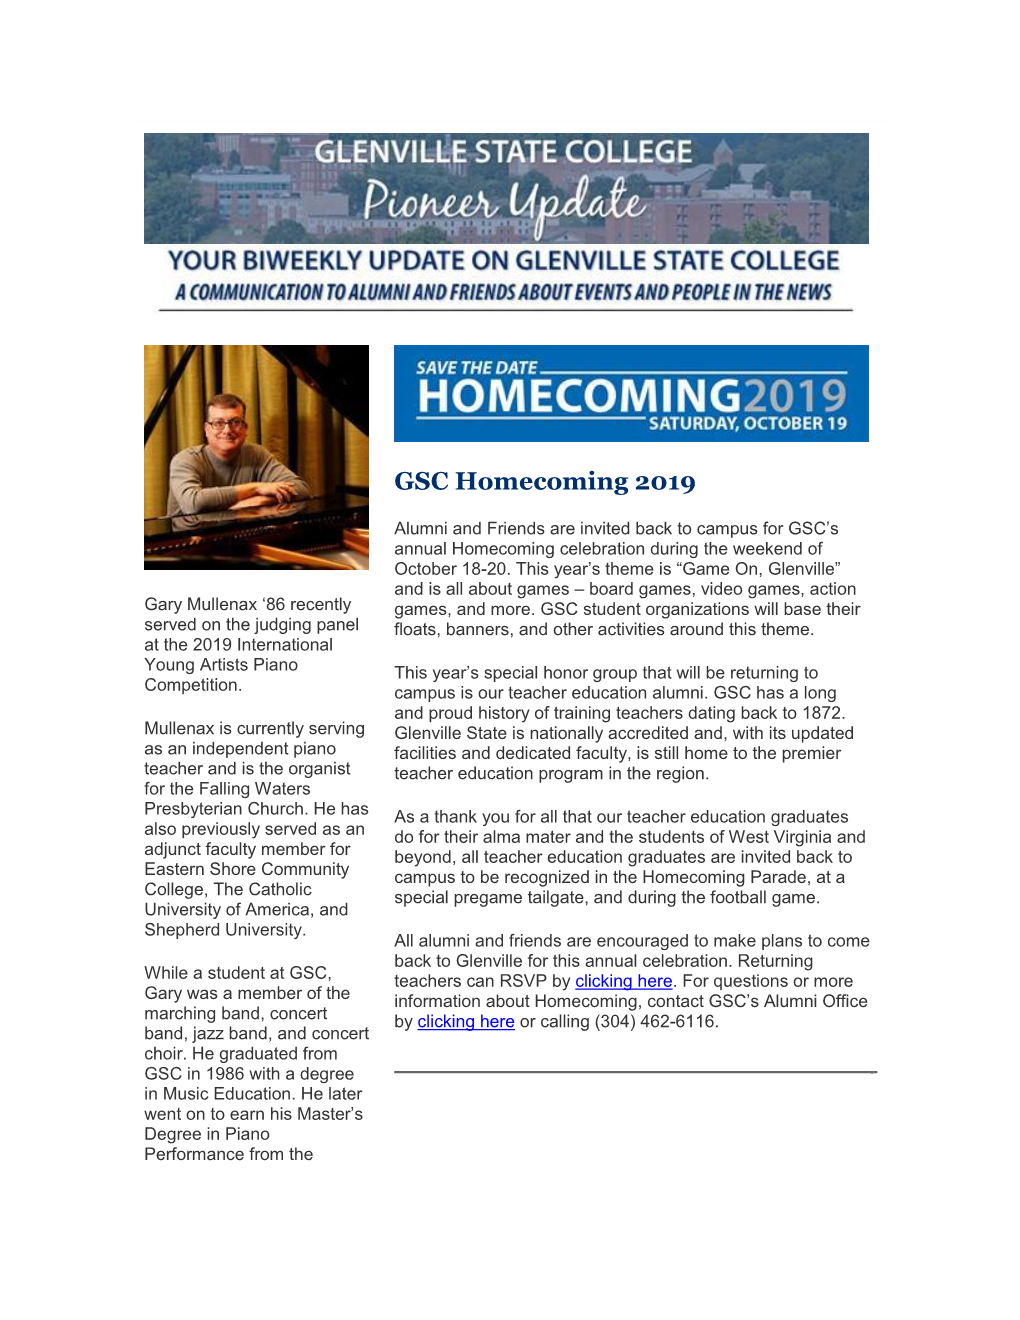 GSC Homecoming 2019